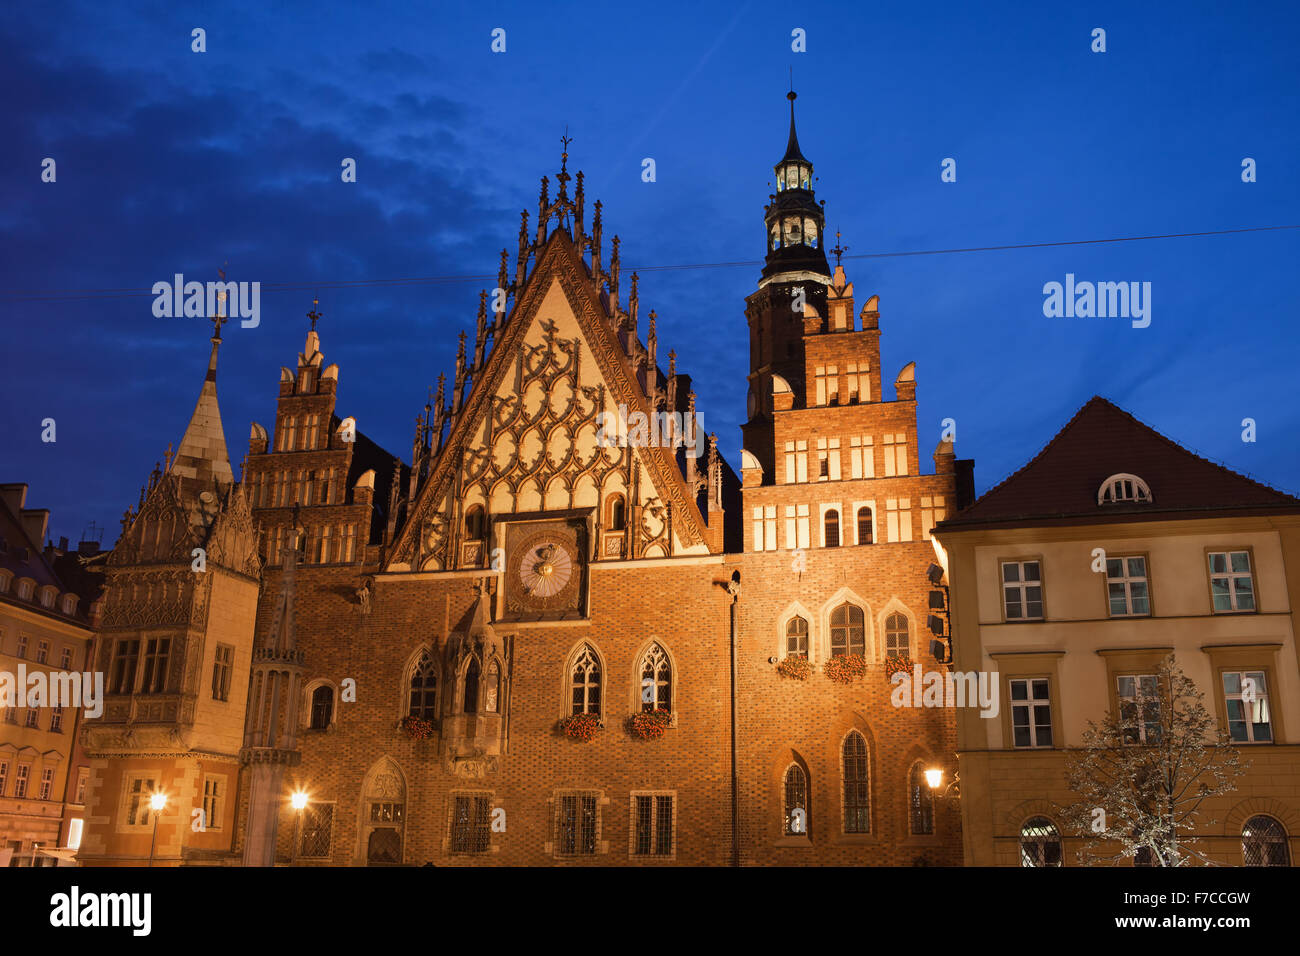 City of Wroclaw in Poland, Old Town Hall (Polish: Stary Ratusz) at night, Gothic style architecture. Stock Photo